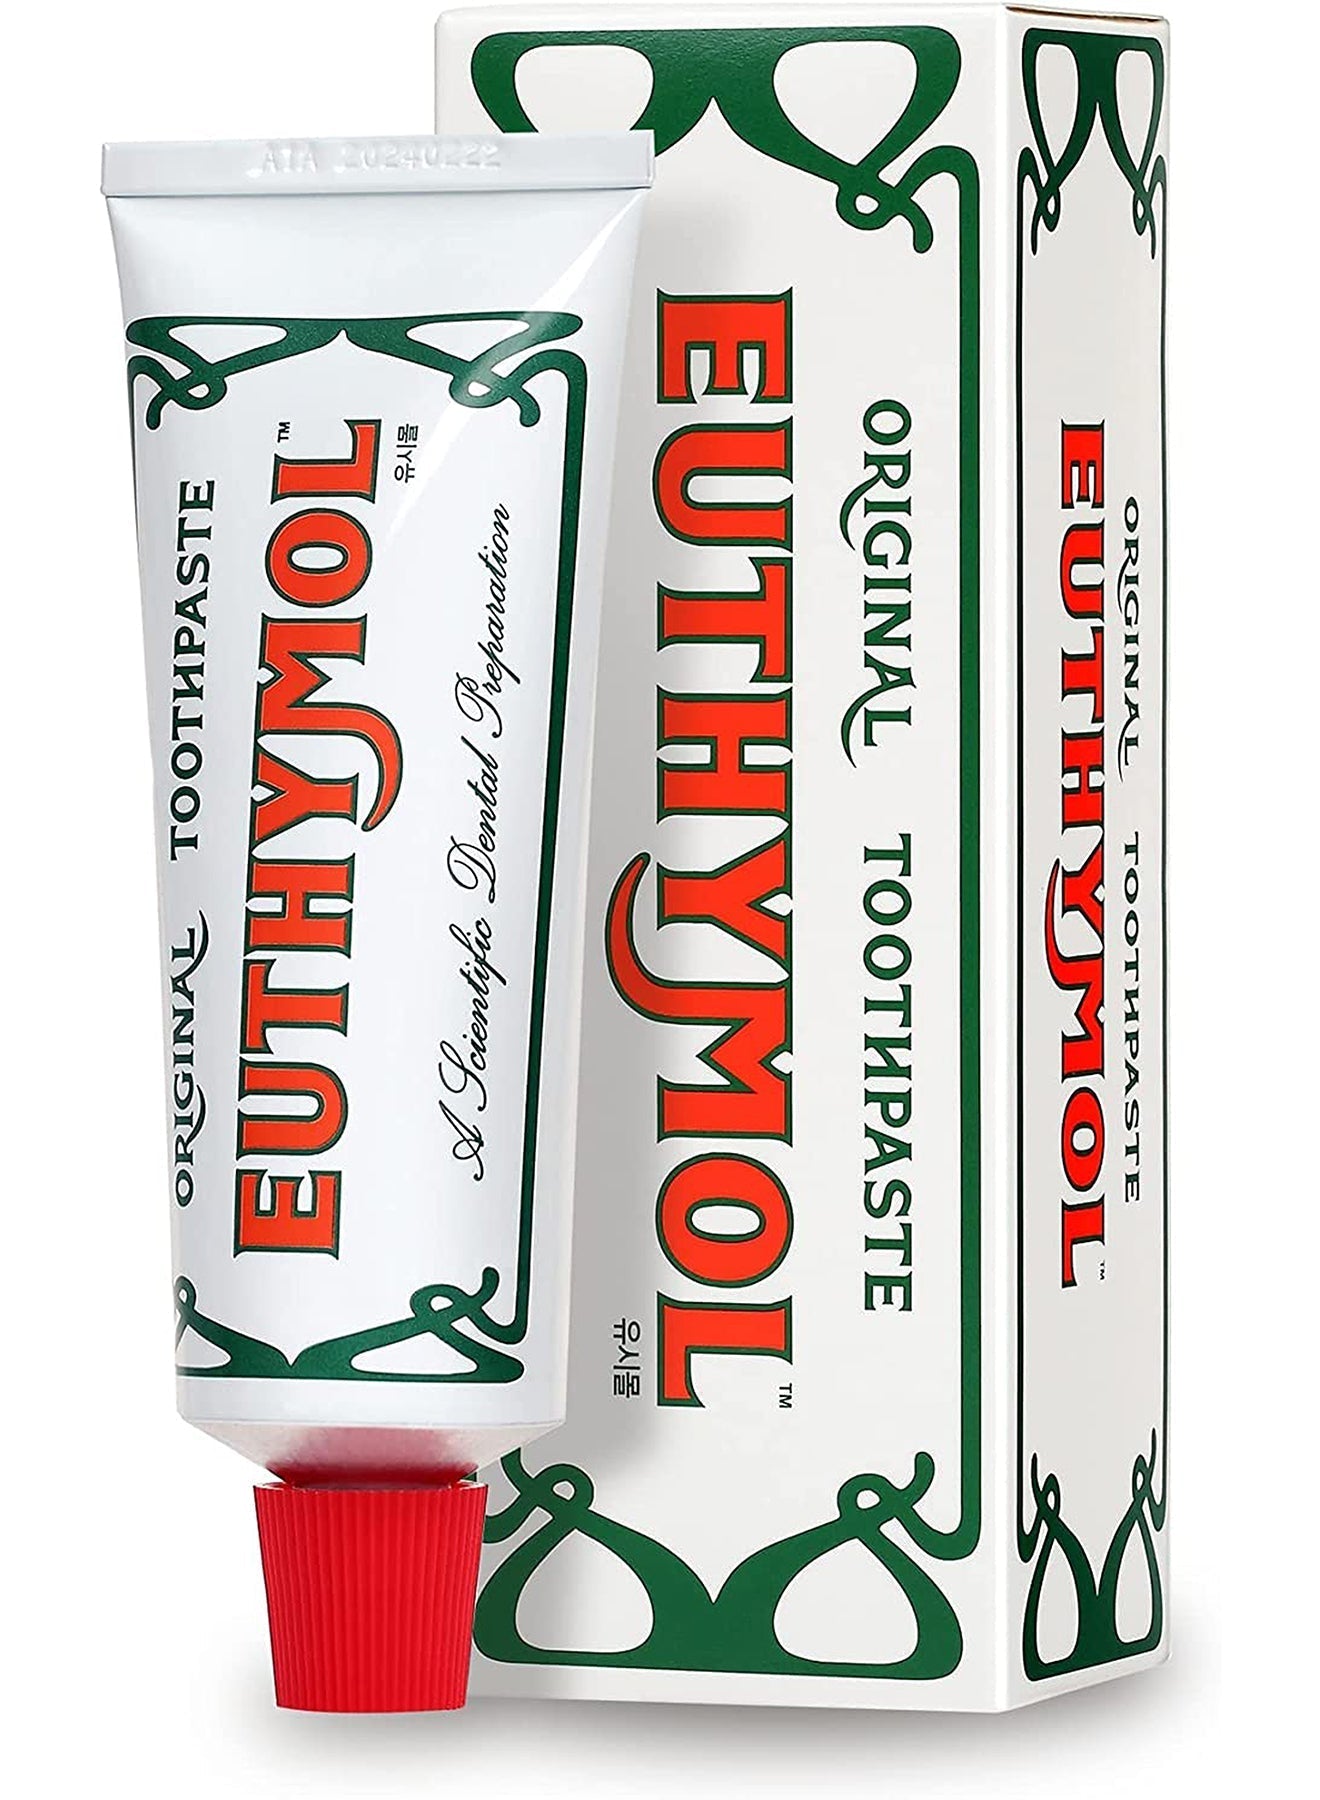 Euthymol Original Toothpaste 75ml Value Pack of 2 